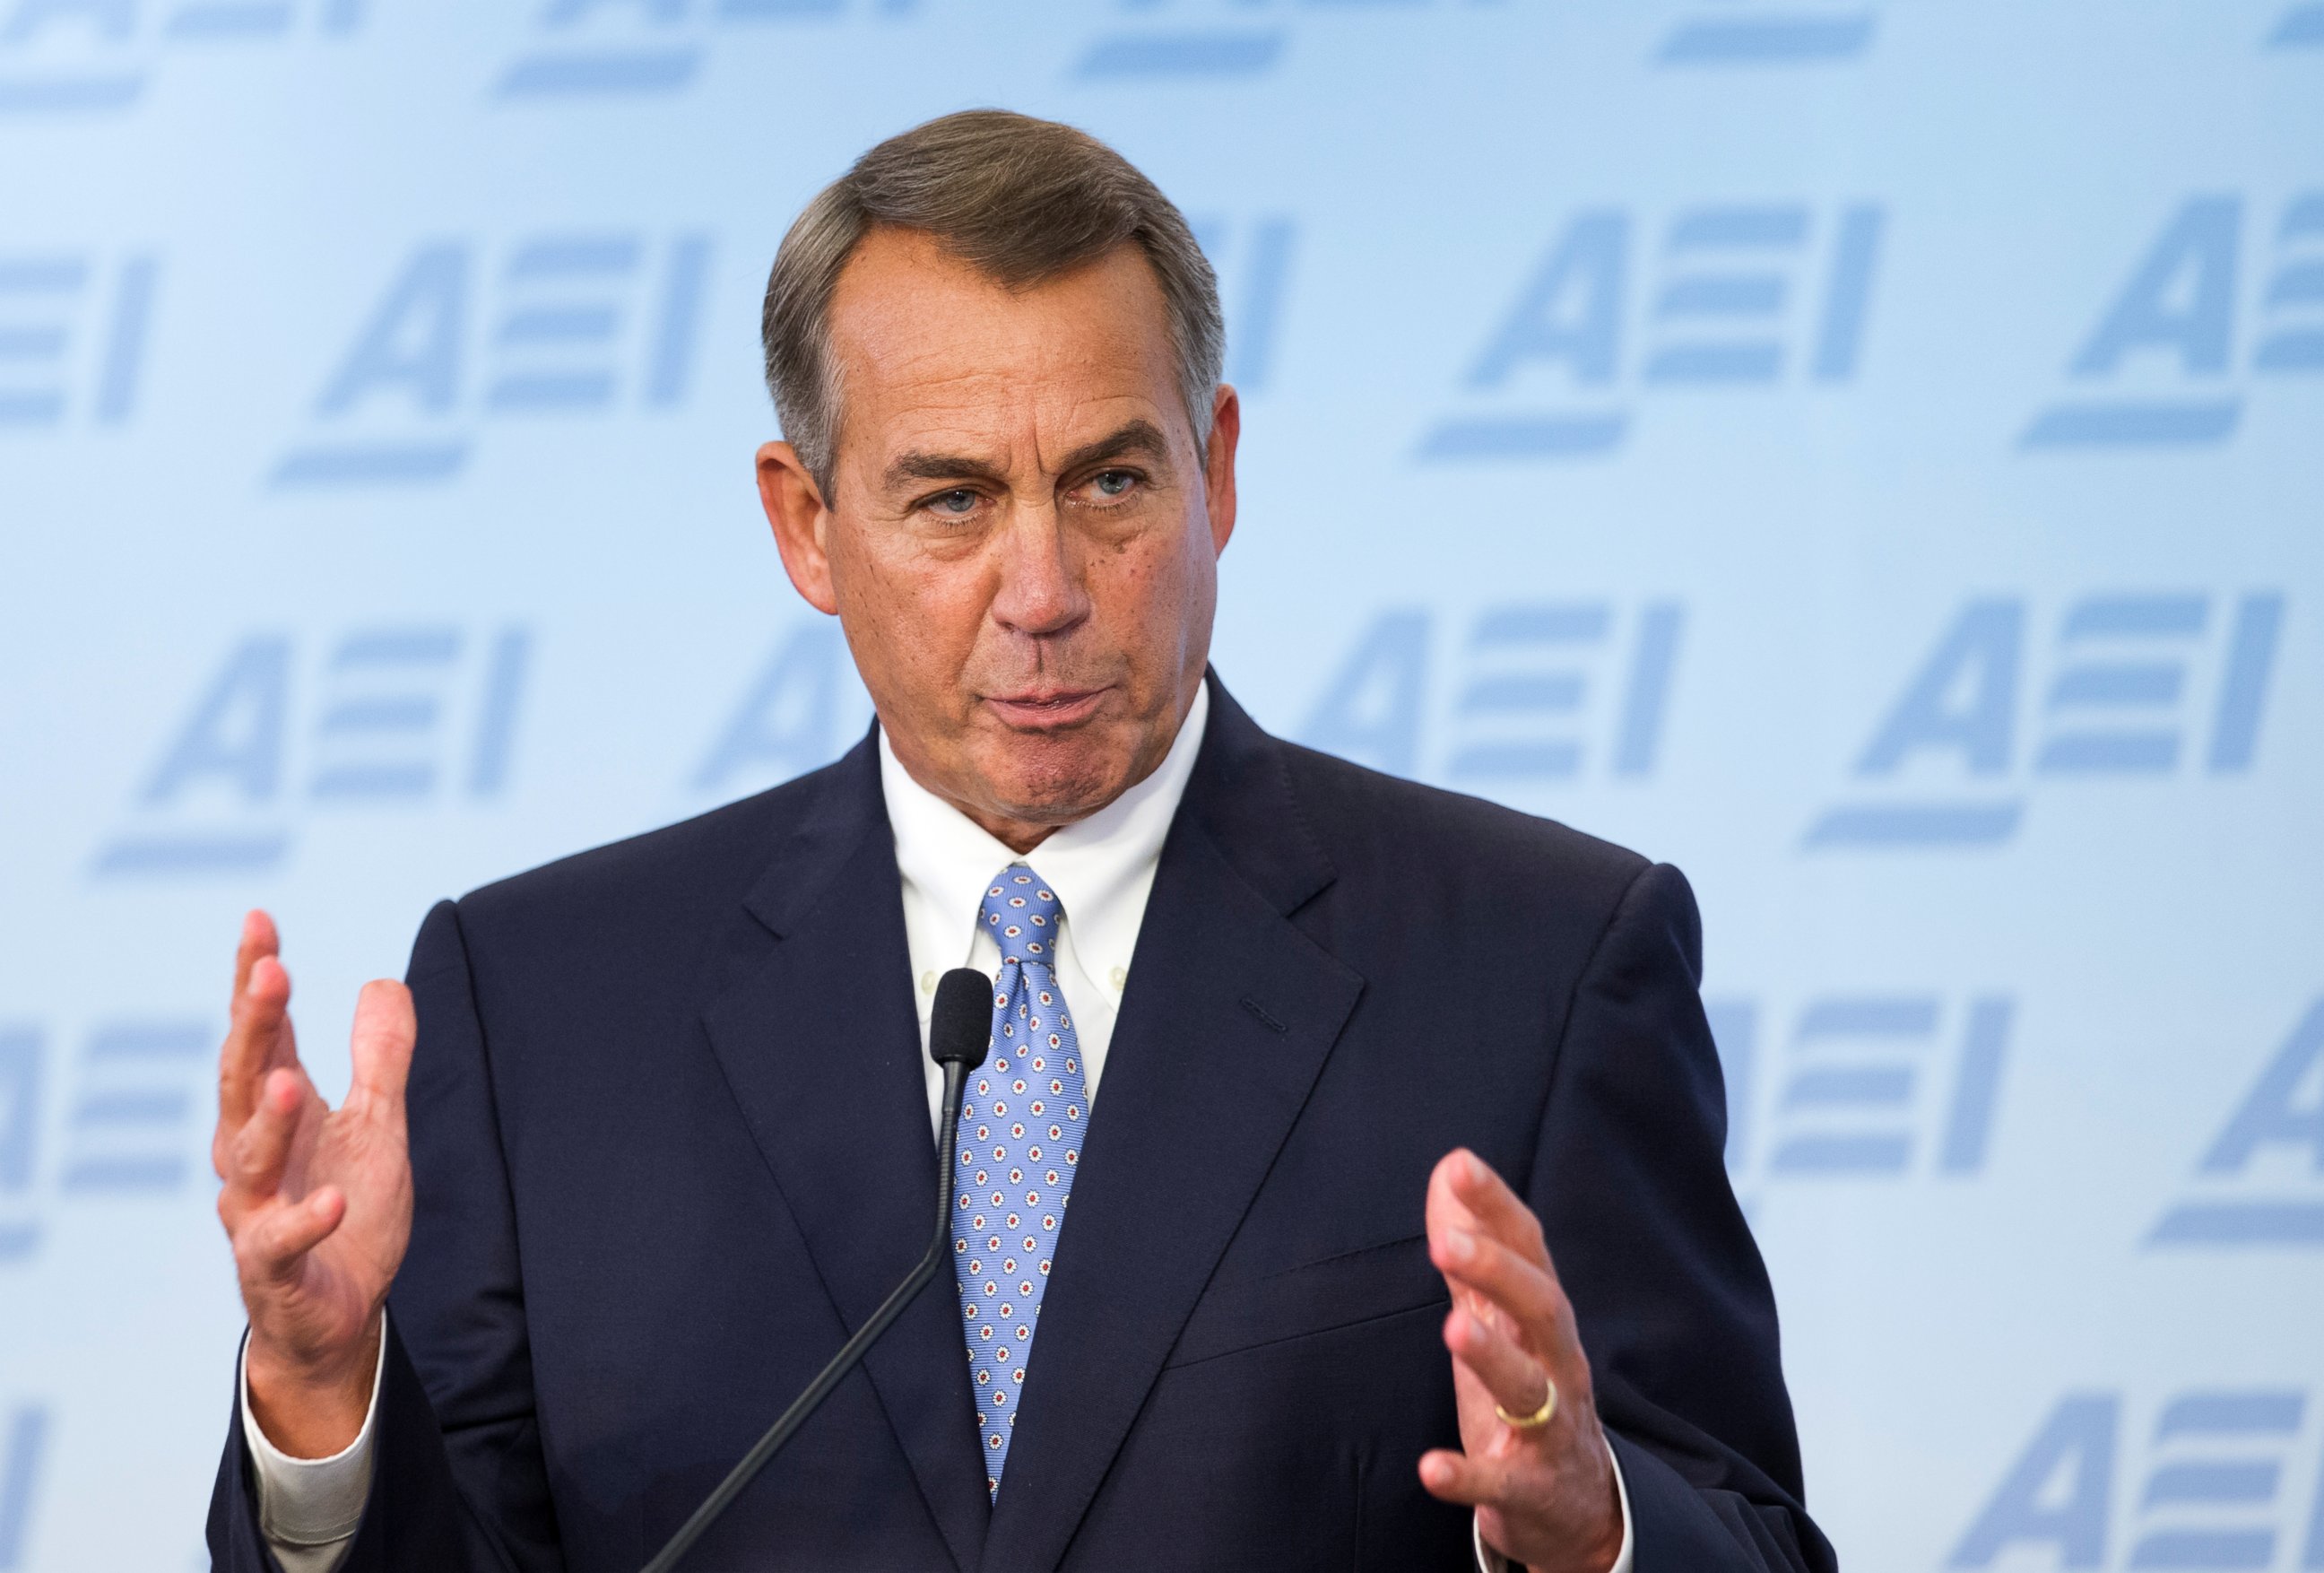 PHOTO: House Speaker John Boehner, R-Ohio, outlines his five-point long-term vision for resetting Americaâ??s economic foundation, during a speech in Washington, Sept. 18, 2014.